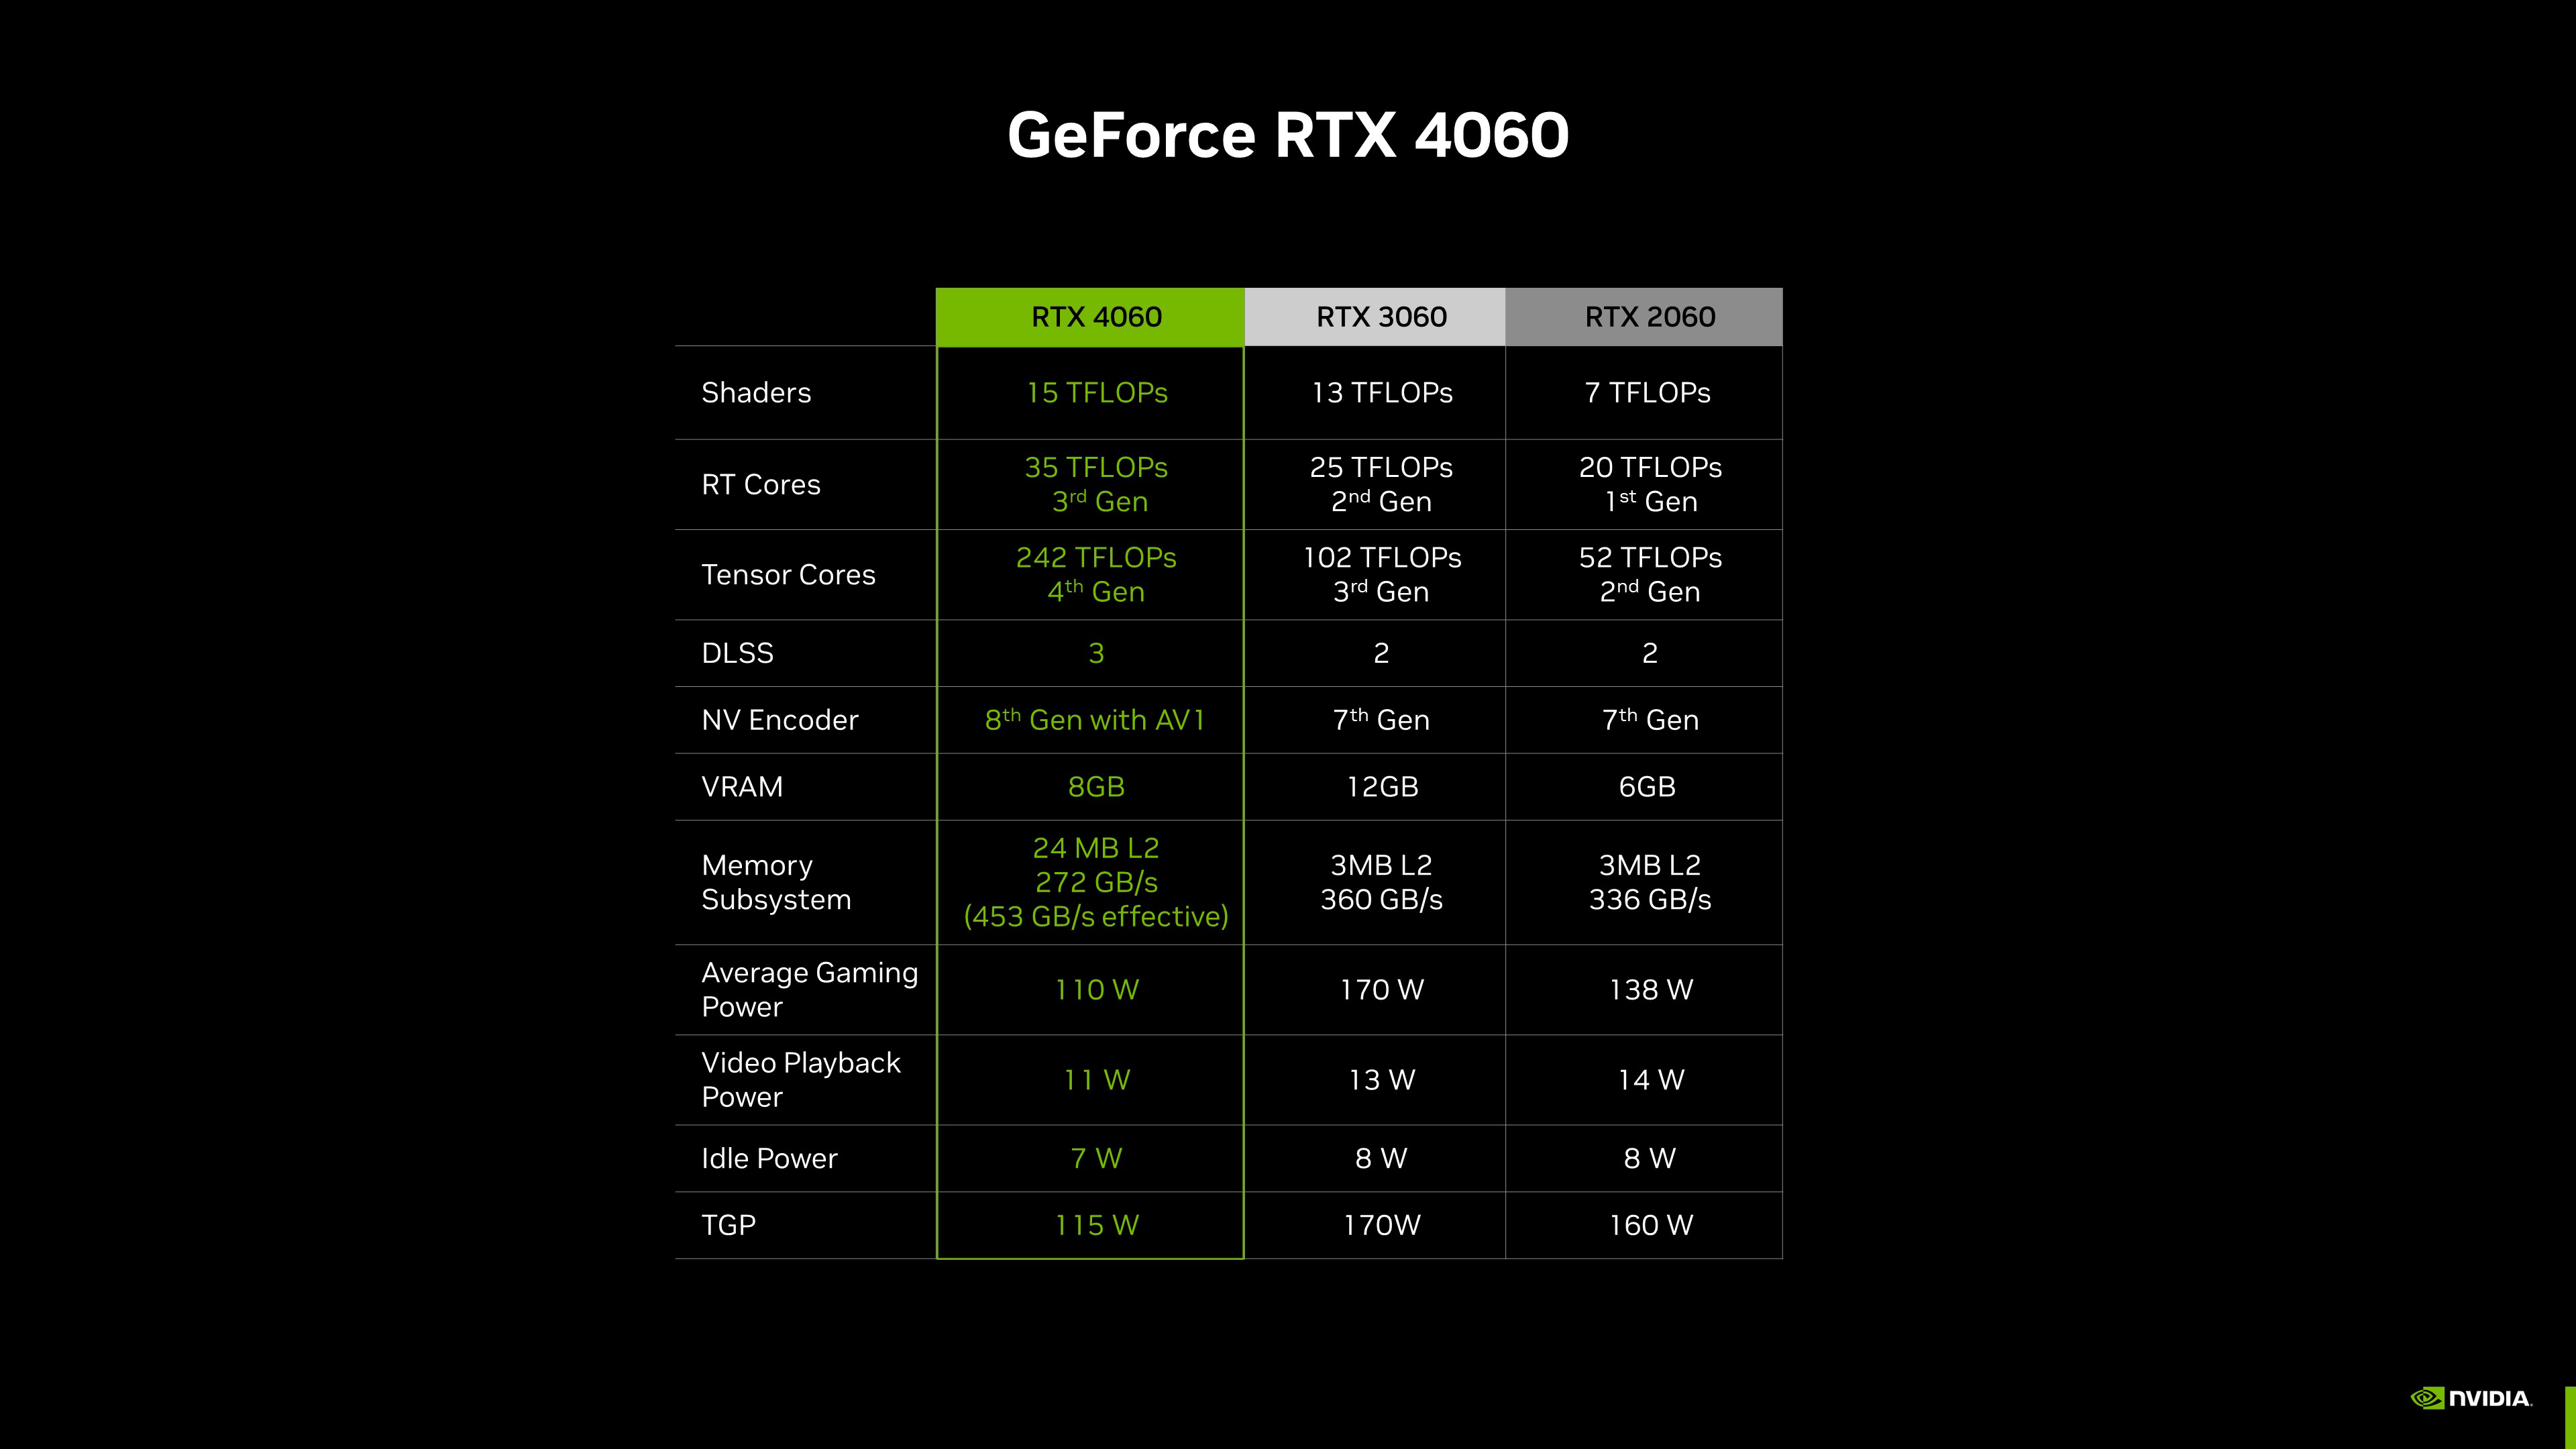 nvidia-geforce-rtx-4060-specifications-comparison.png